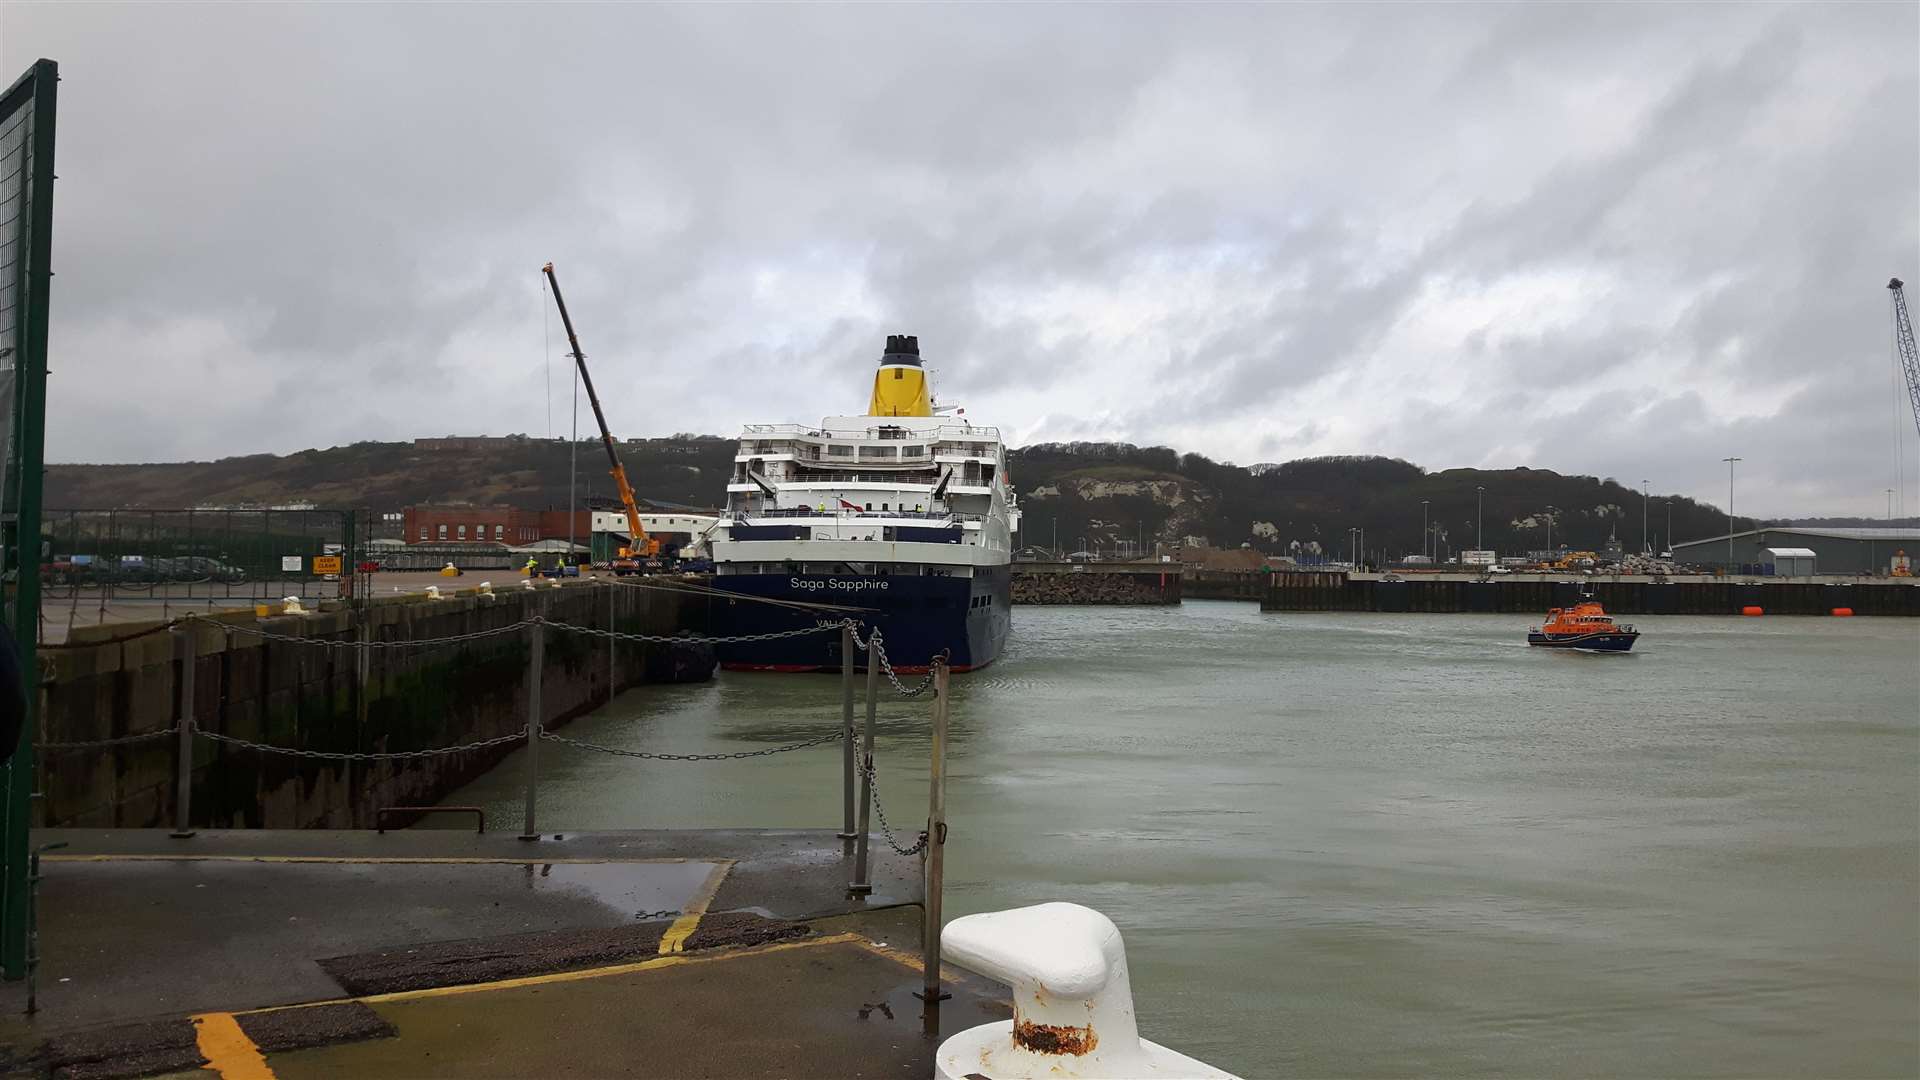 The Saga Saphire docked at Dover after coronavirus forced the company to suspend its cruises